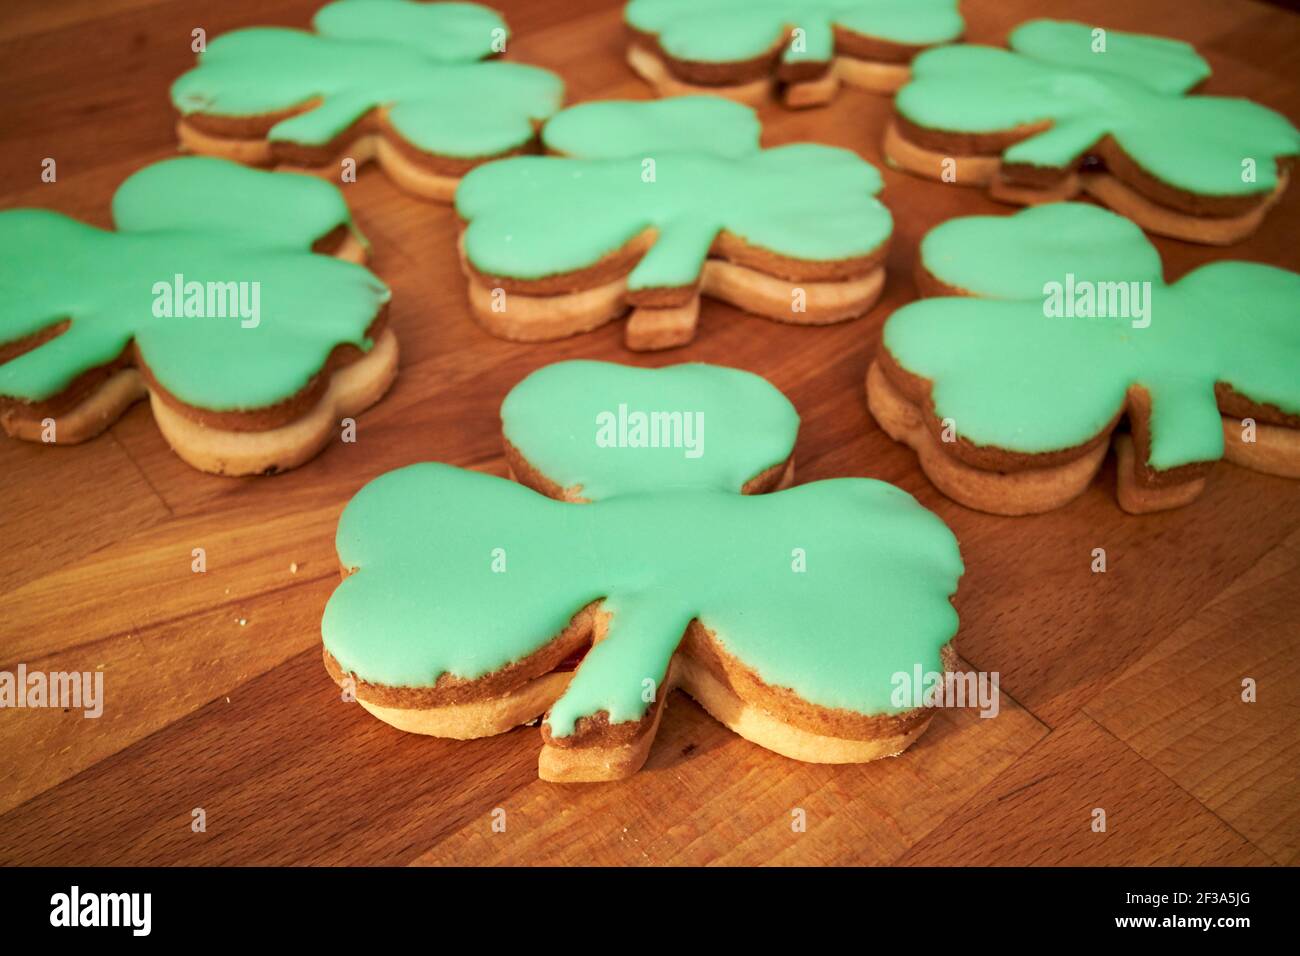 shamrock shaped biscuits produced to celebrate st patricks day in ireland Stock Photo